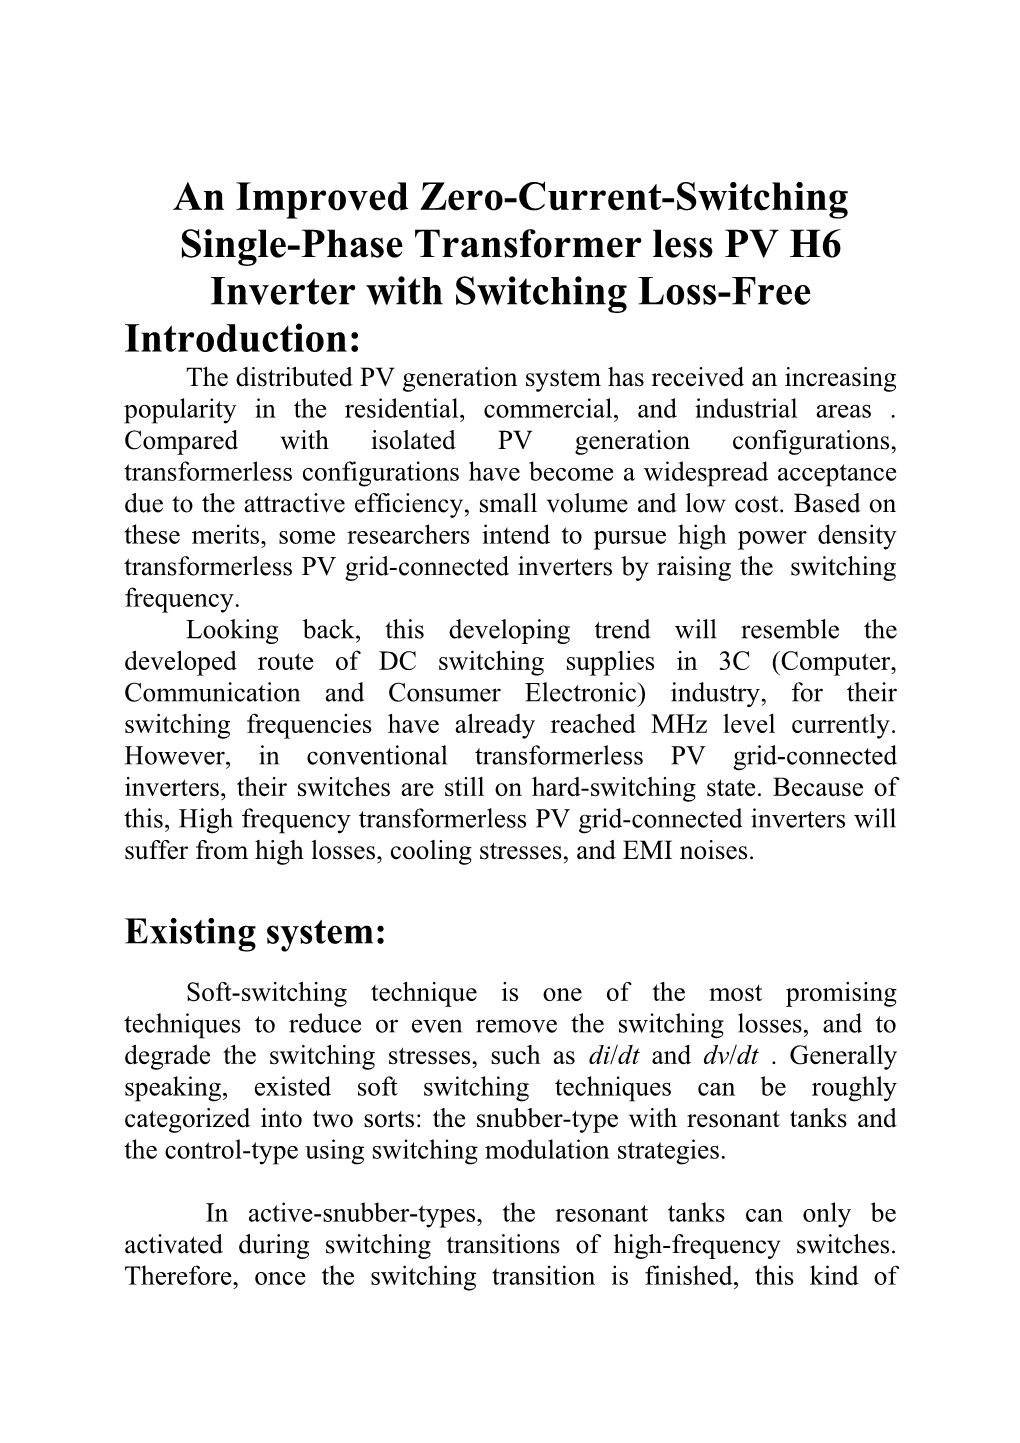 An Improved Zero-Current-Switching Single-Phase Transformerless PV H6 Inverter with Switching